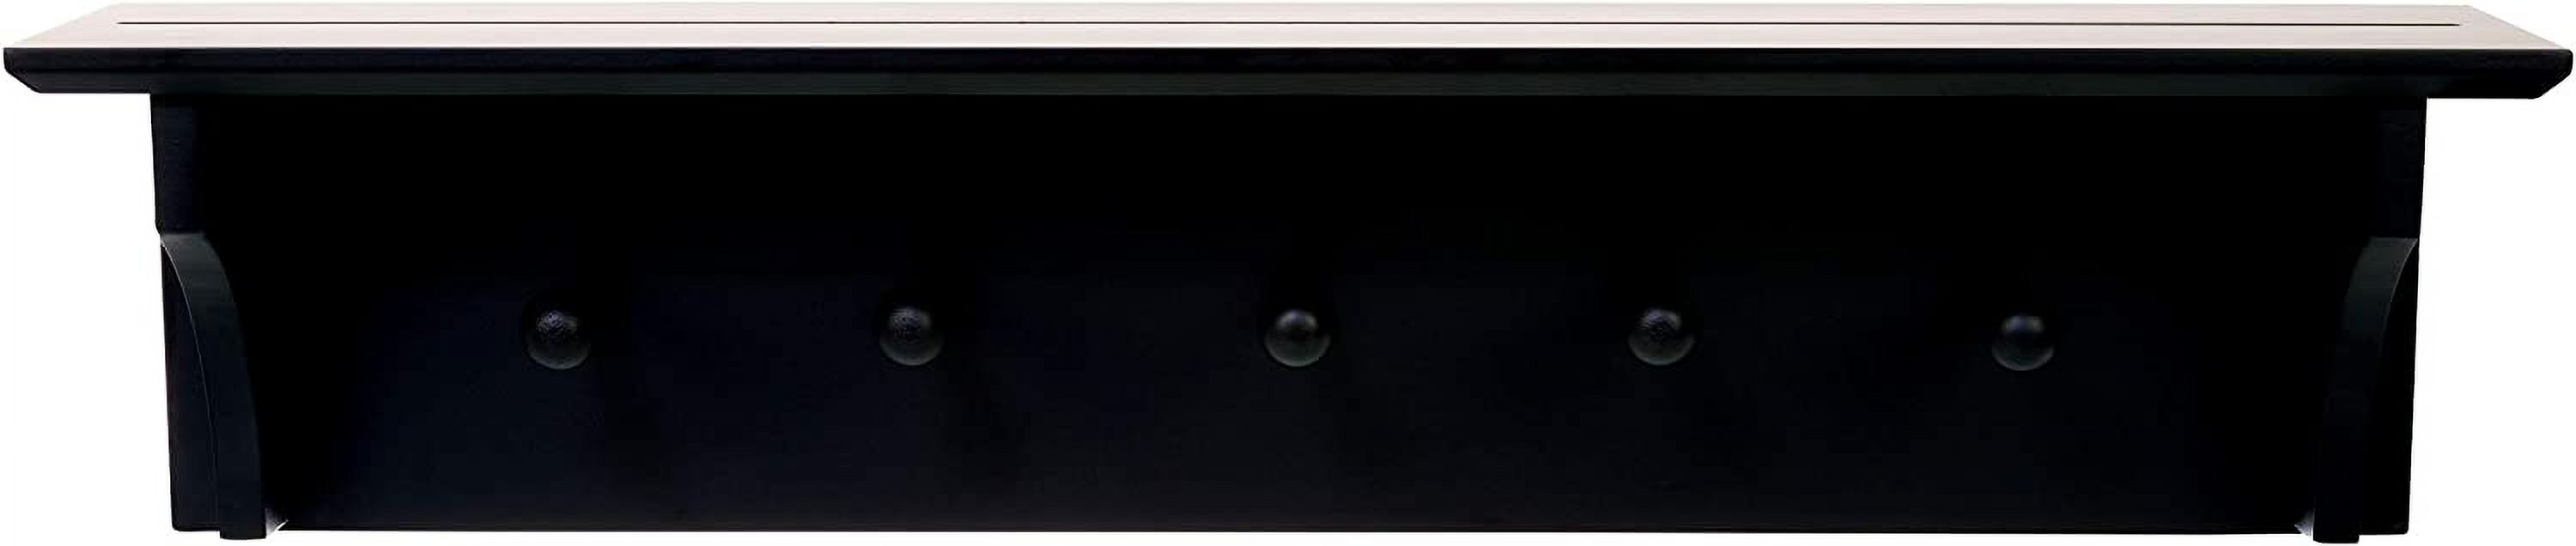 Generic Foster 24" Wall Shelf With 5 Pegs - image 1 of 7